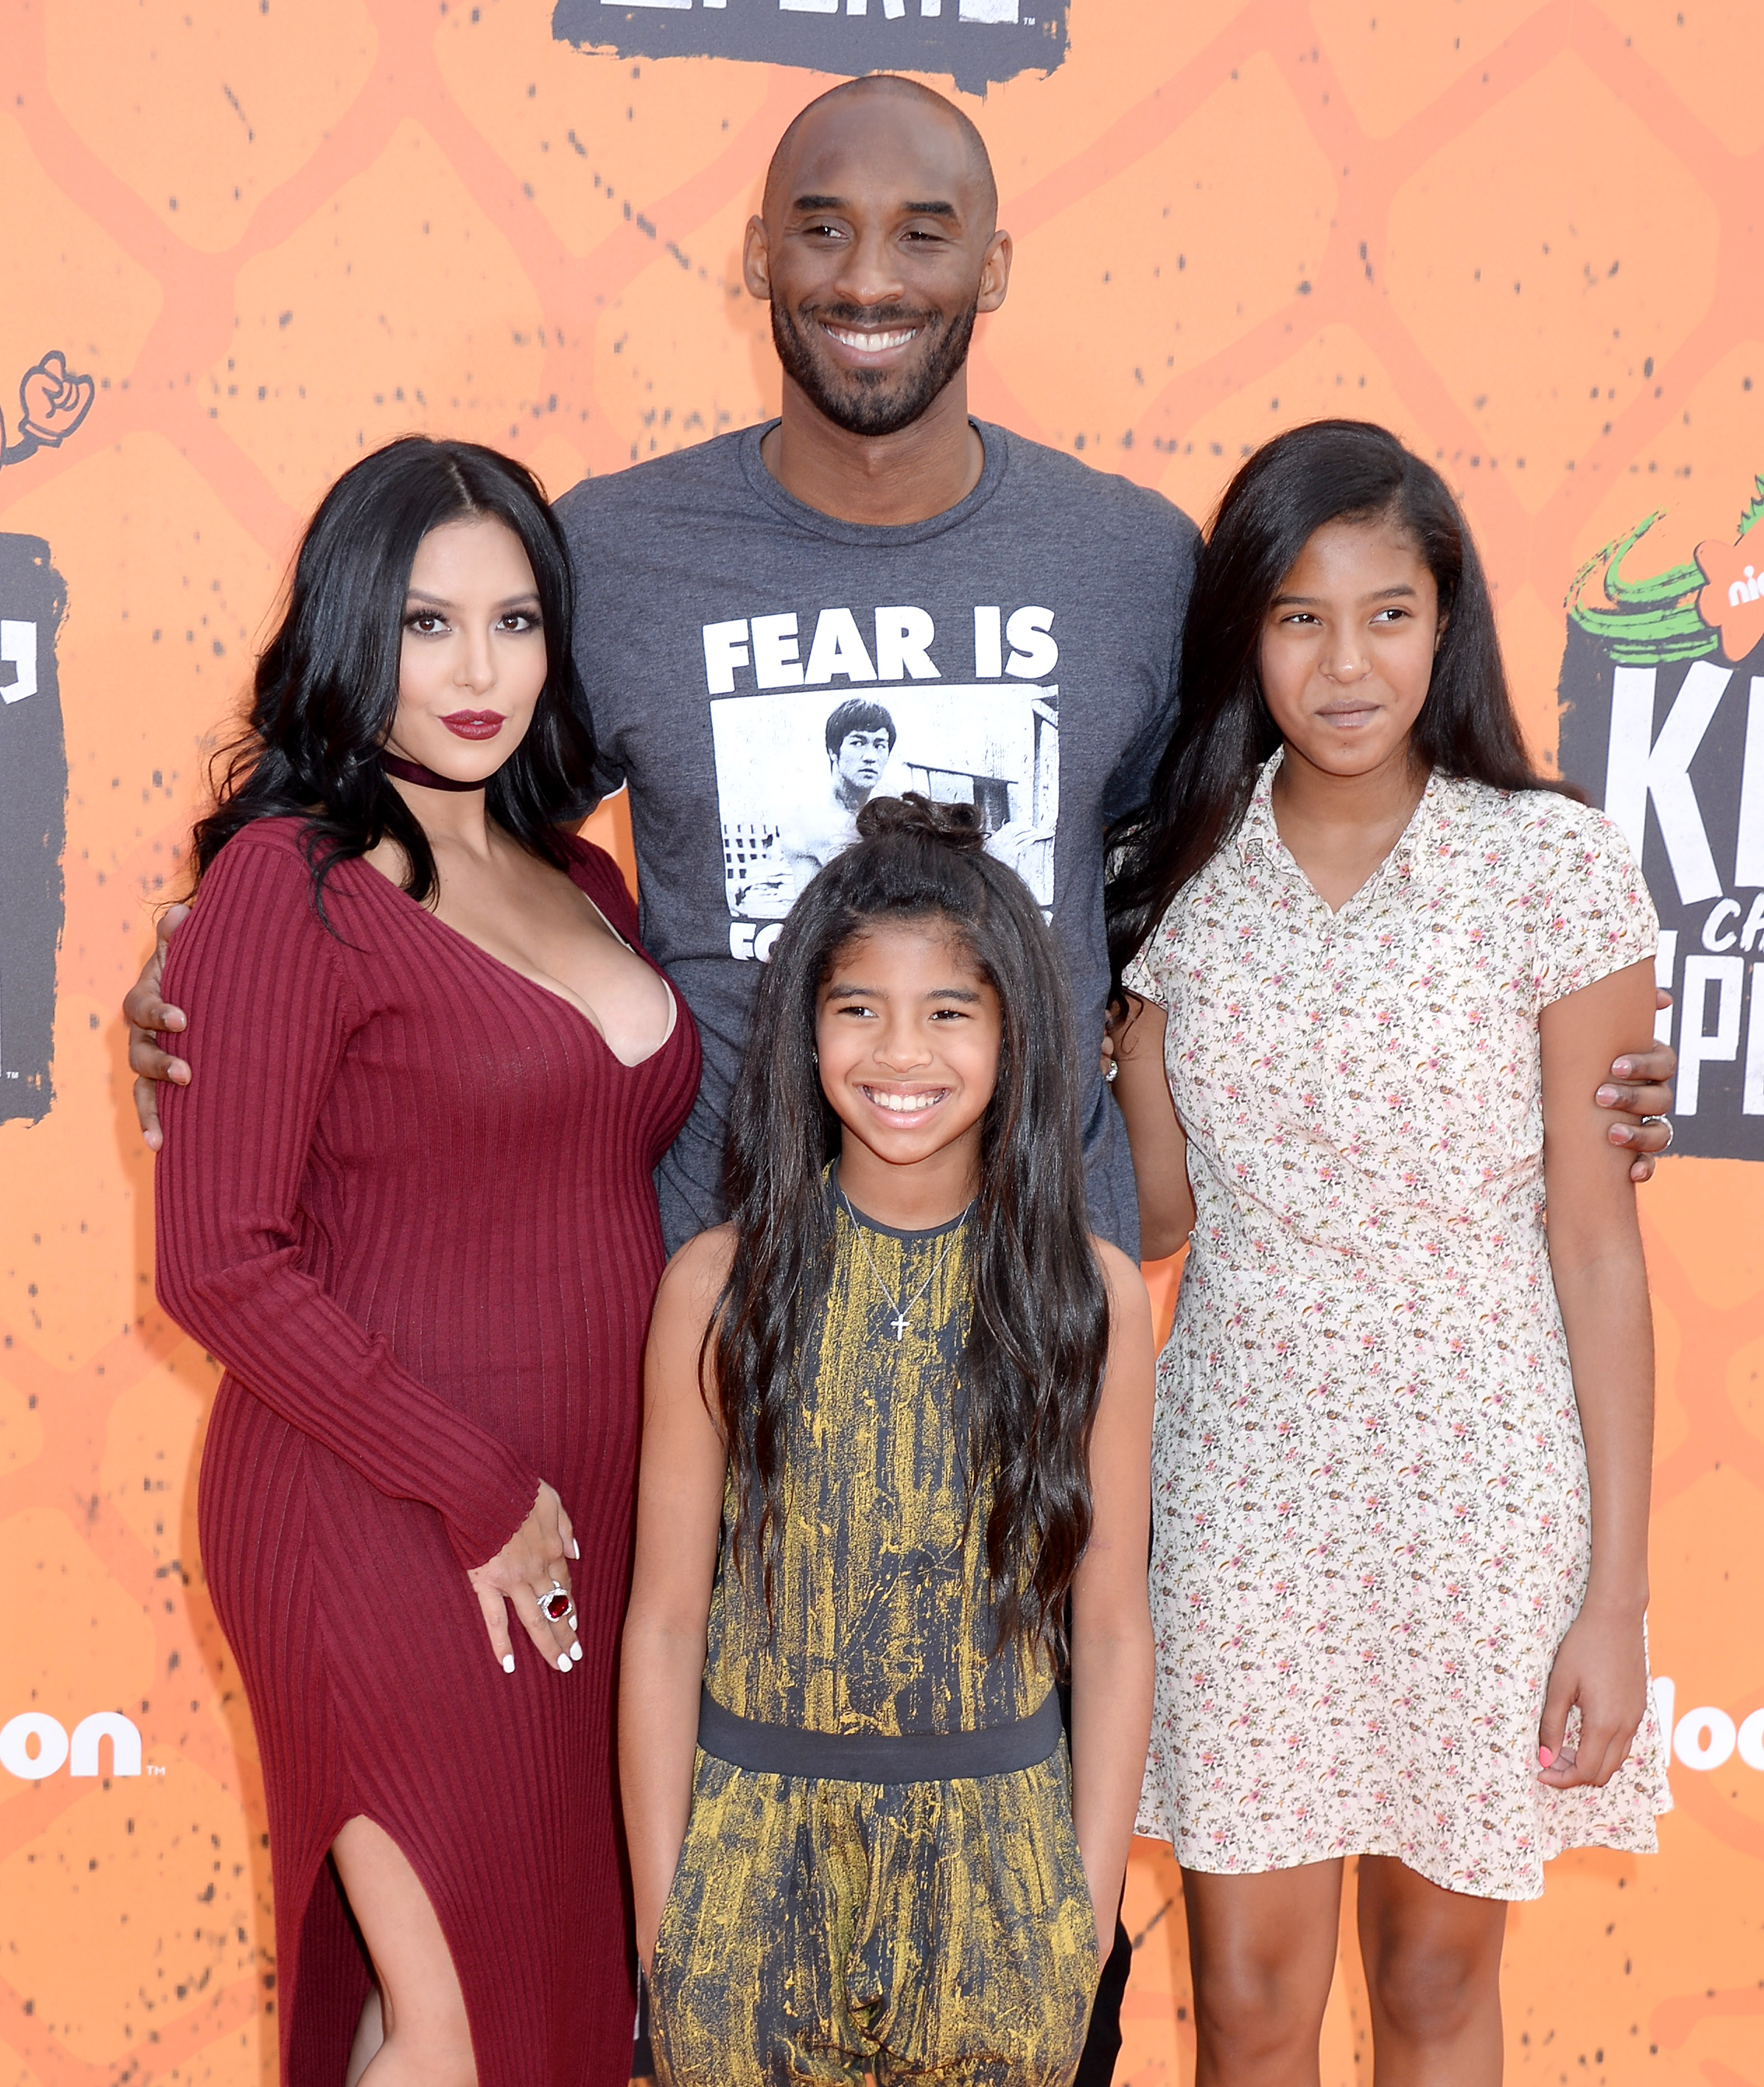 Who Are Kobe Bryant's Wife and Kids? He 